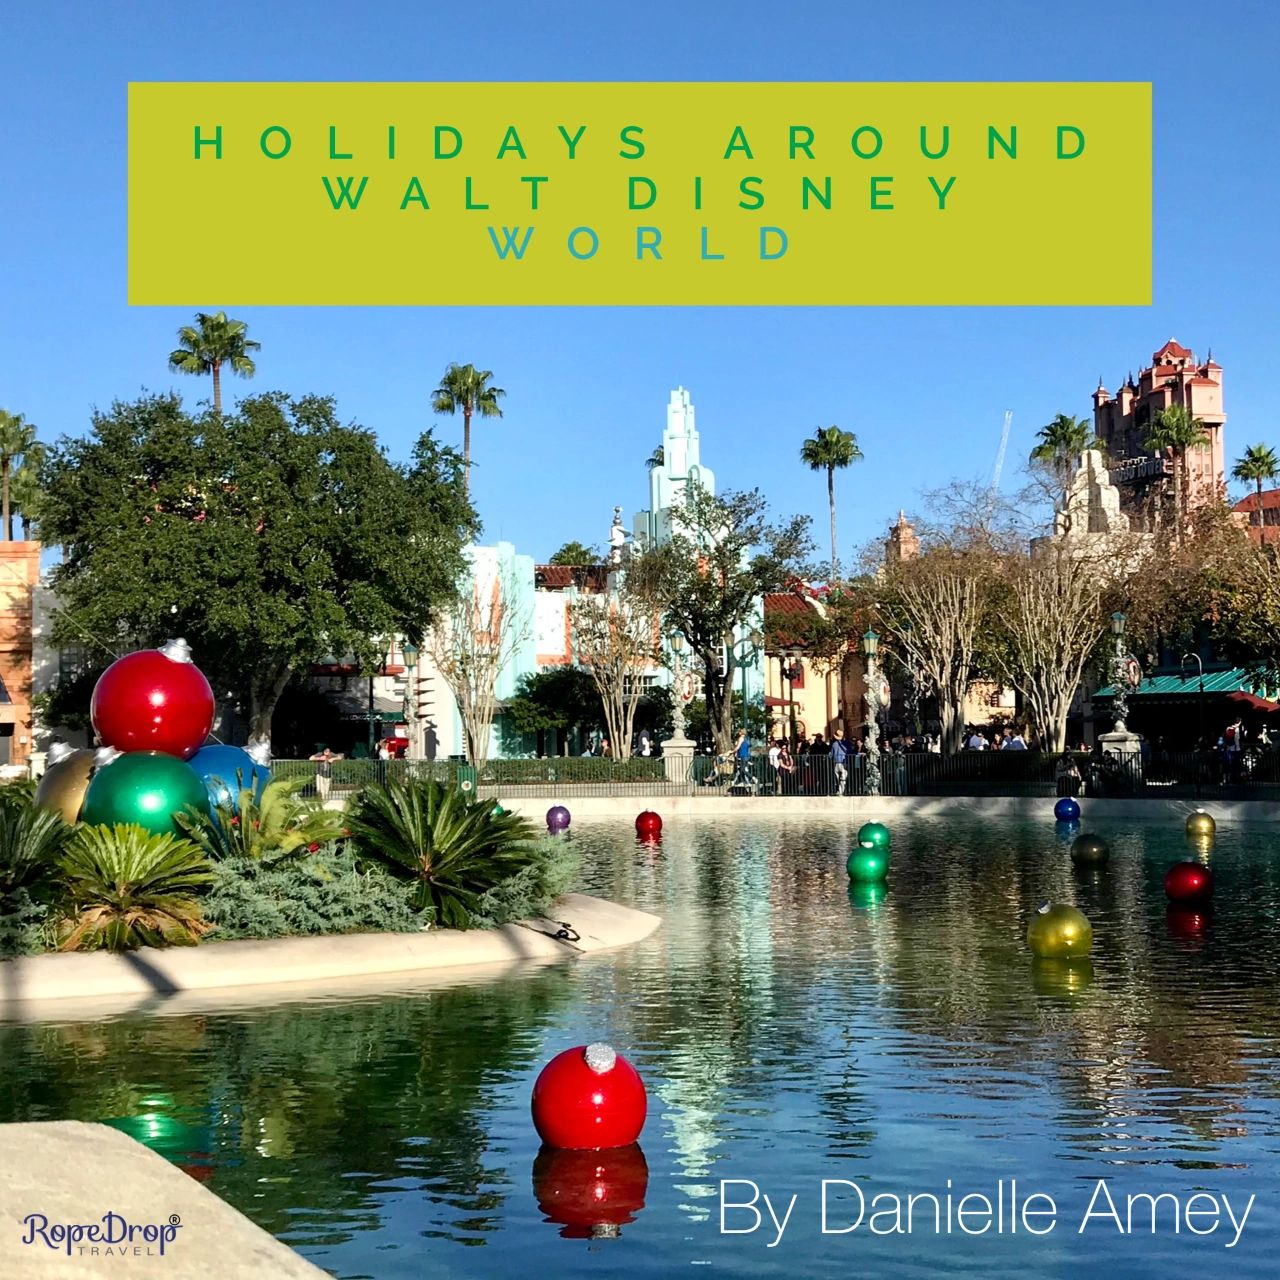 What you Can Expect at Walt Disney World this Holiday Season